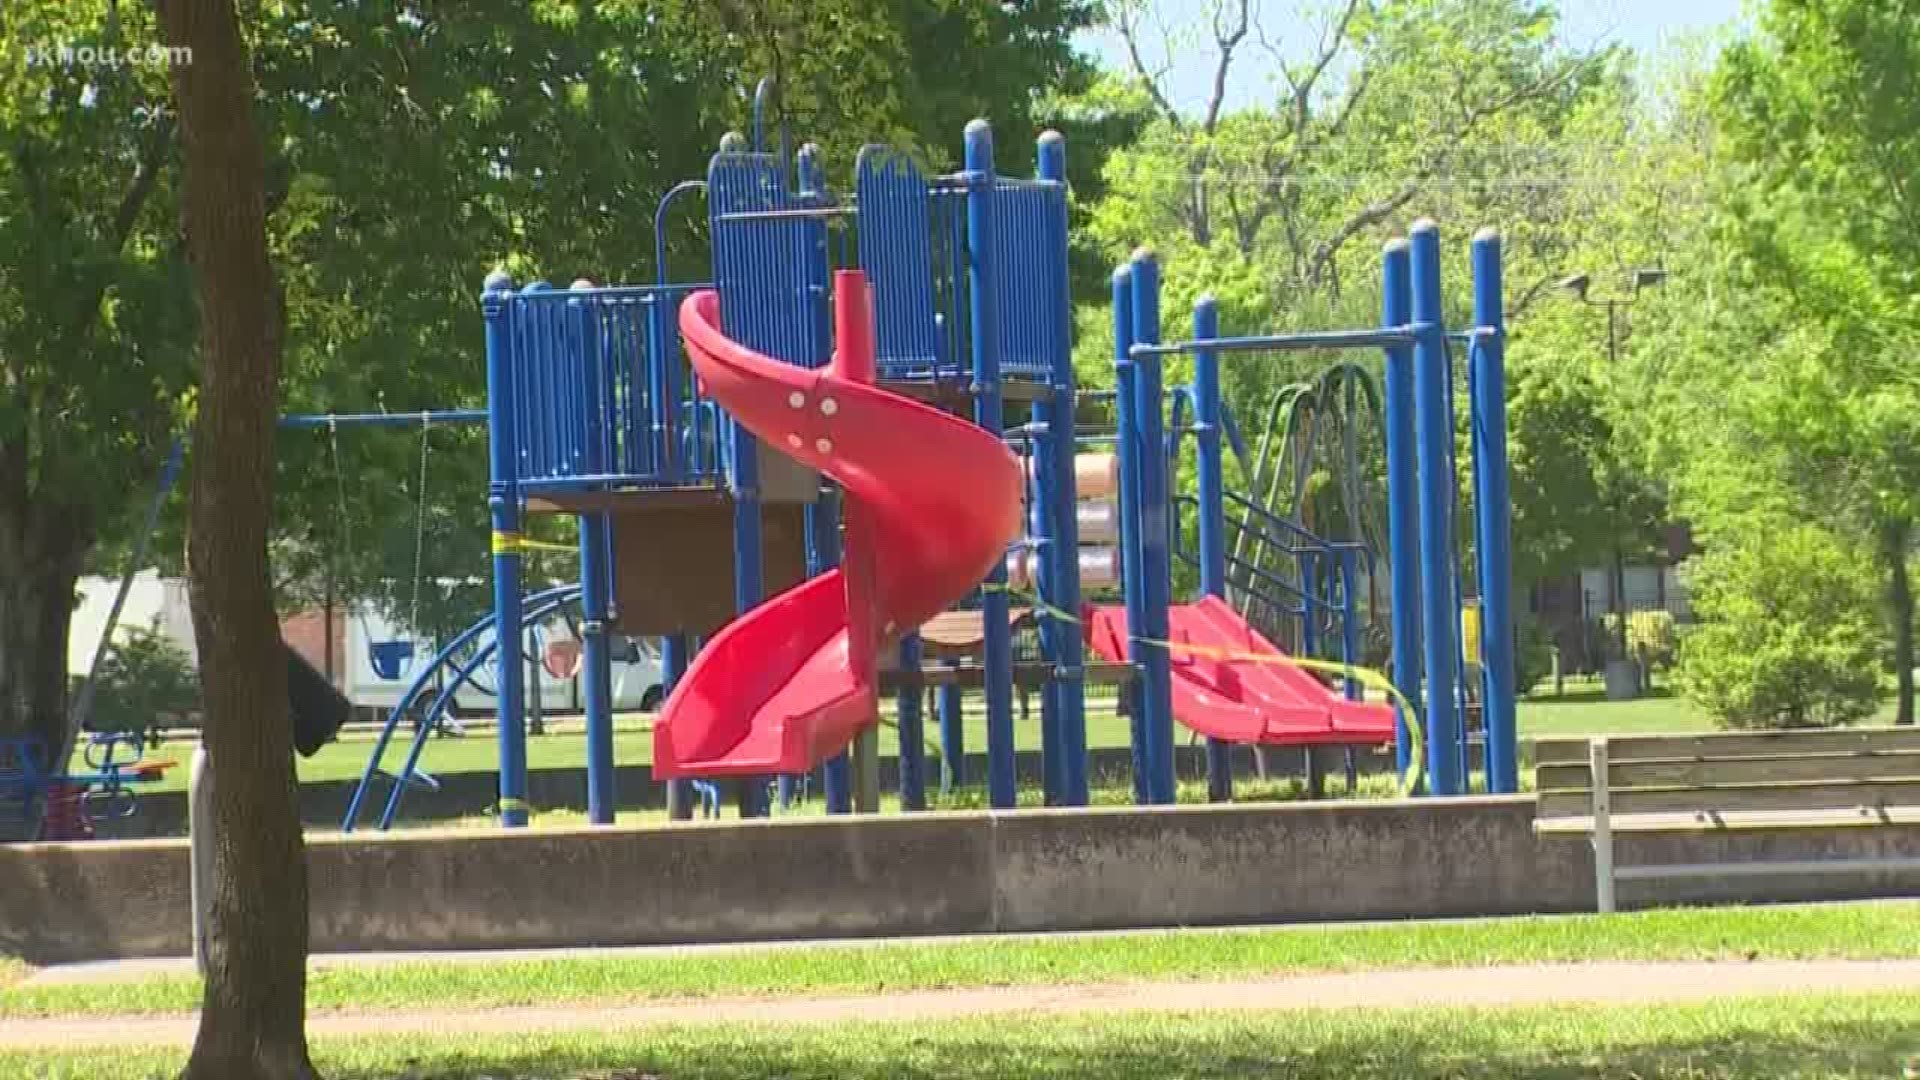 Mayor Sylvester Turner said on Wednesday just because he is not planning to close the parks doesn't mean that could change before the weekend.